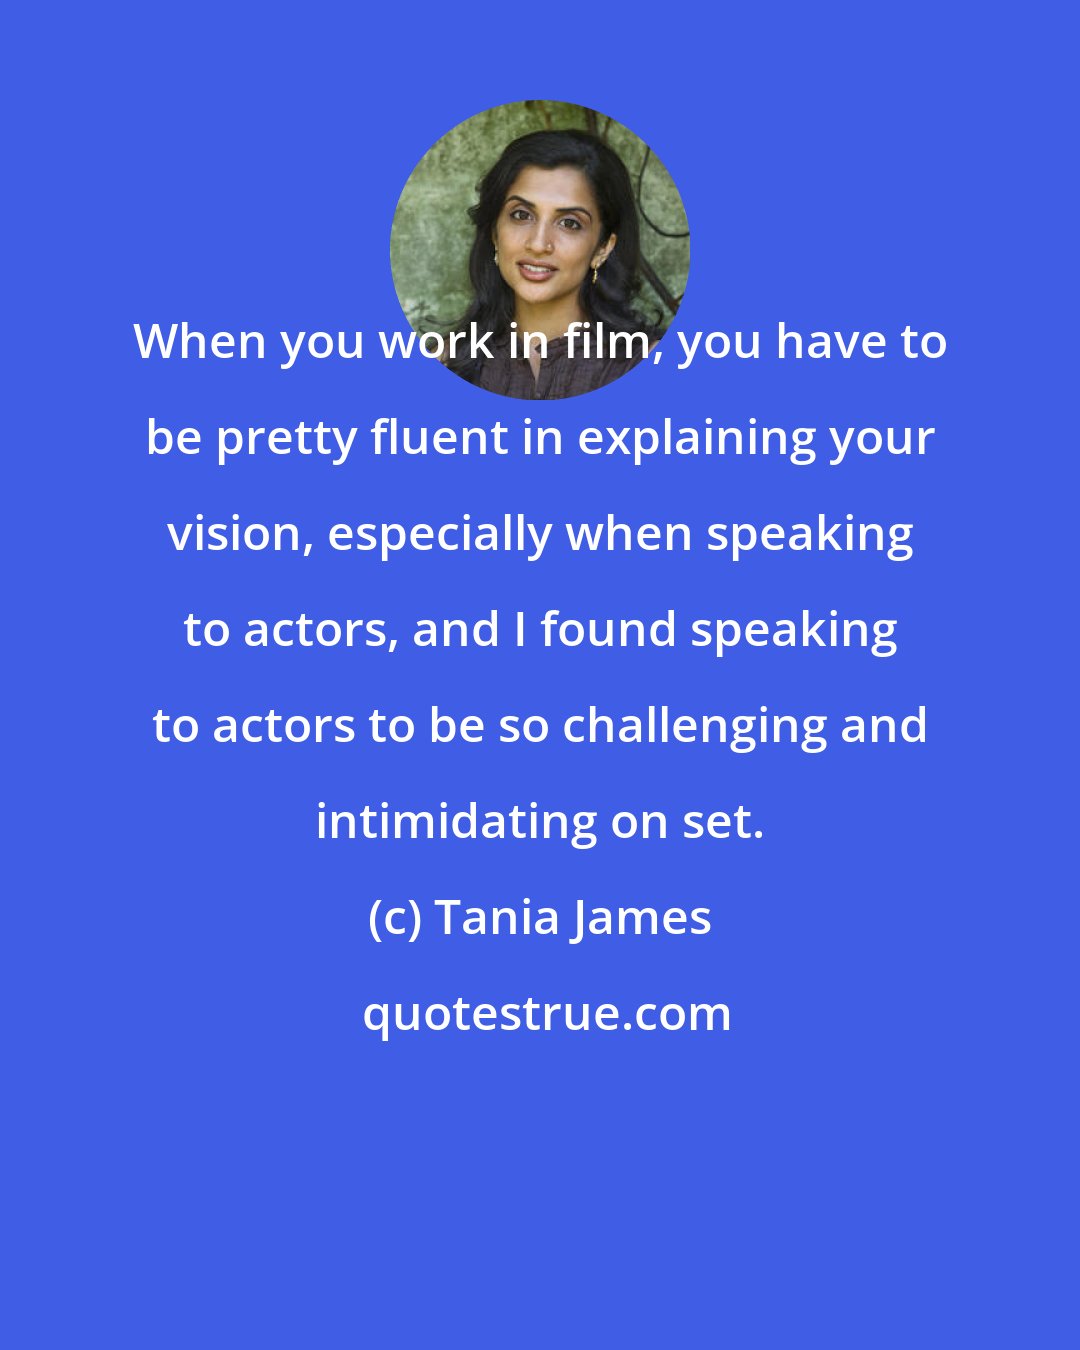 Tania James: When you work in film, you have to be pretty fluent in explaining your vision, especially when speaking to actors, and I found speaking to actors to be so challenging and intimidating on set.